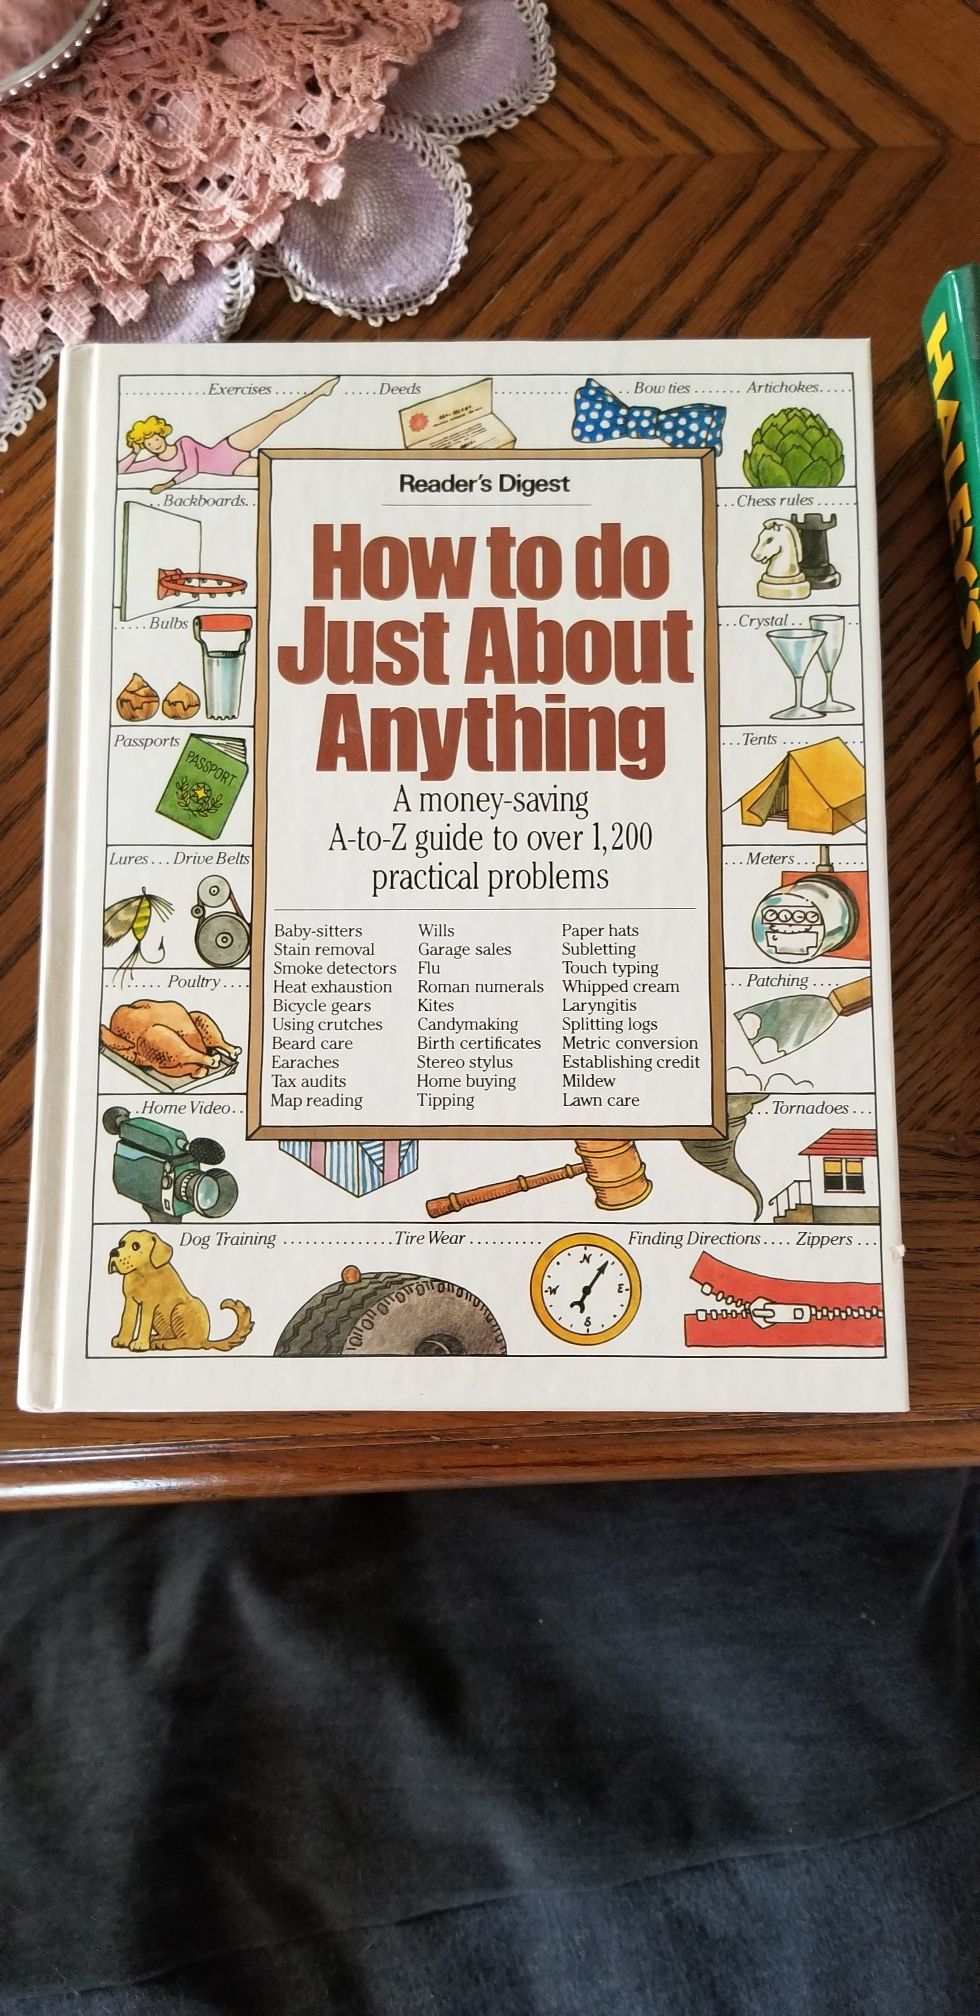 How to do just about anything book